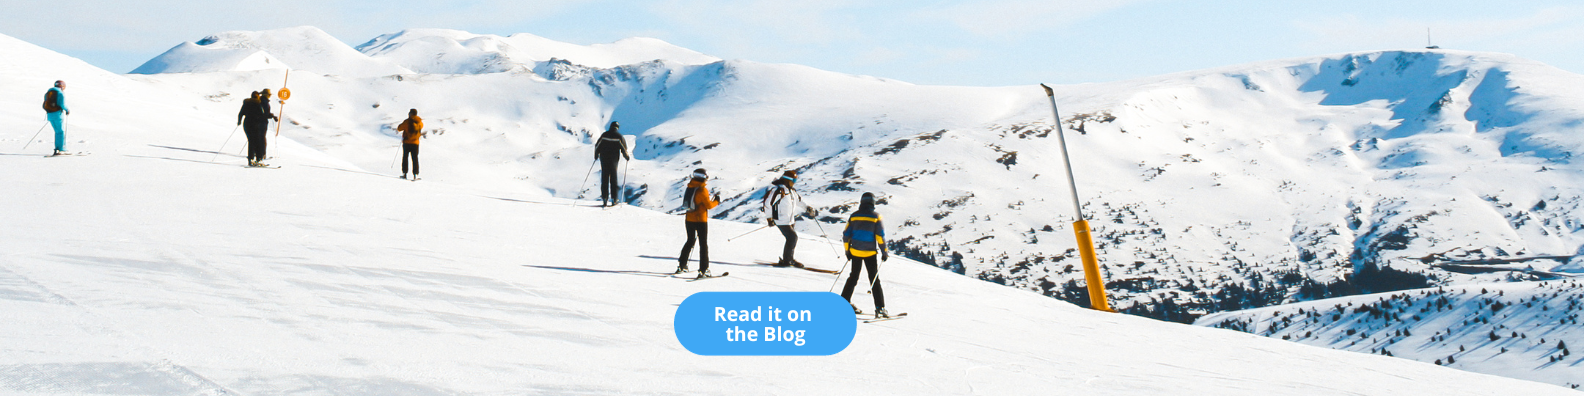 People Skiing in a Mountain - Blog Post Barter's Travelnet